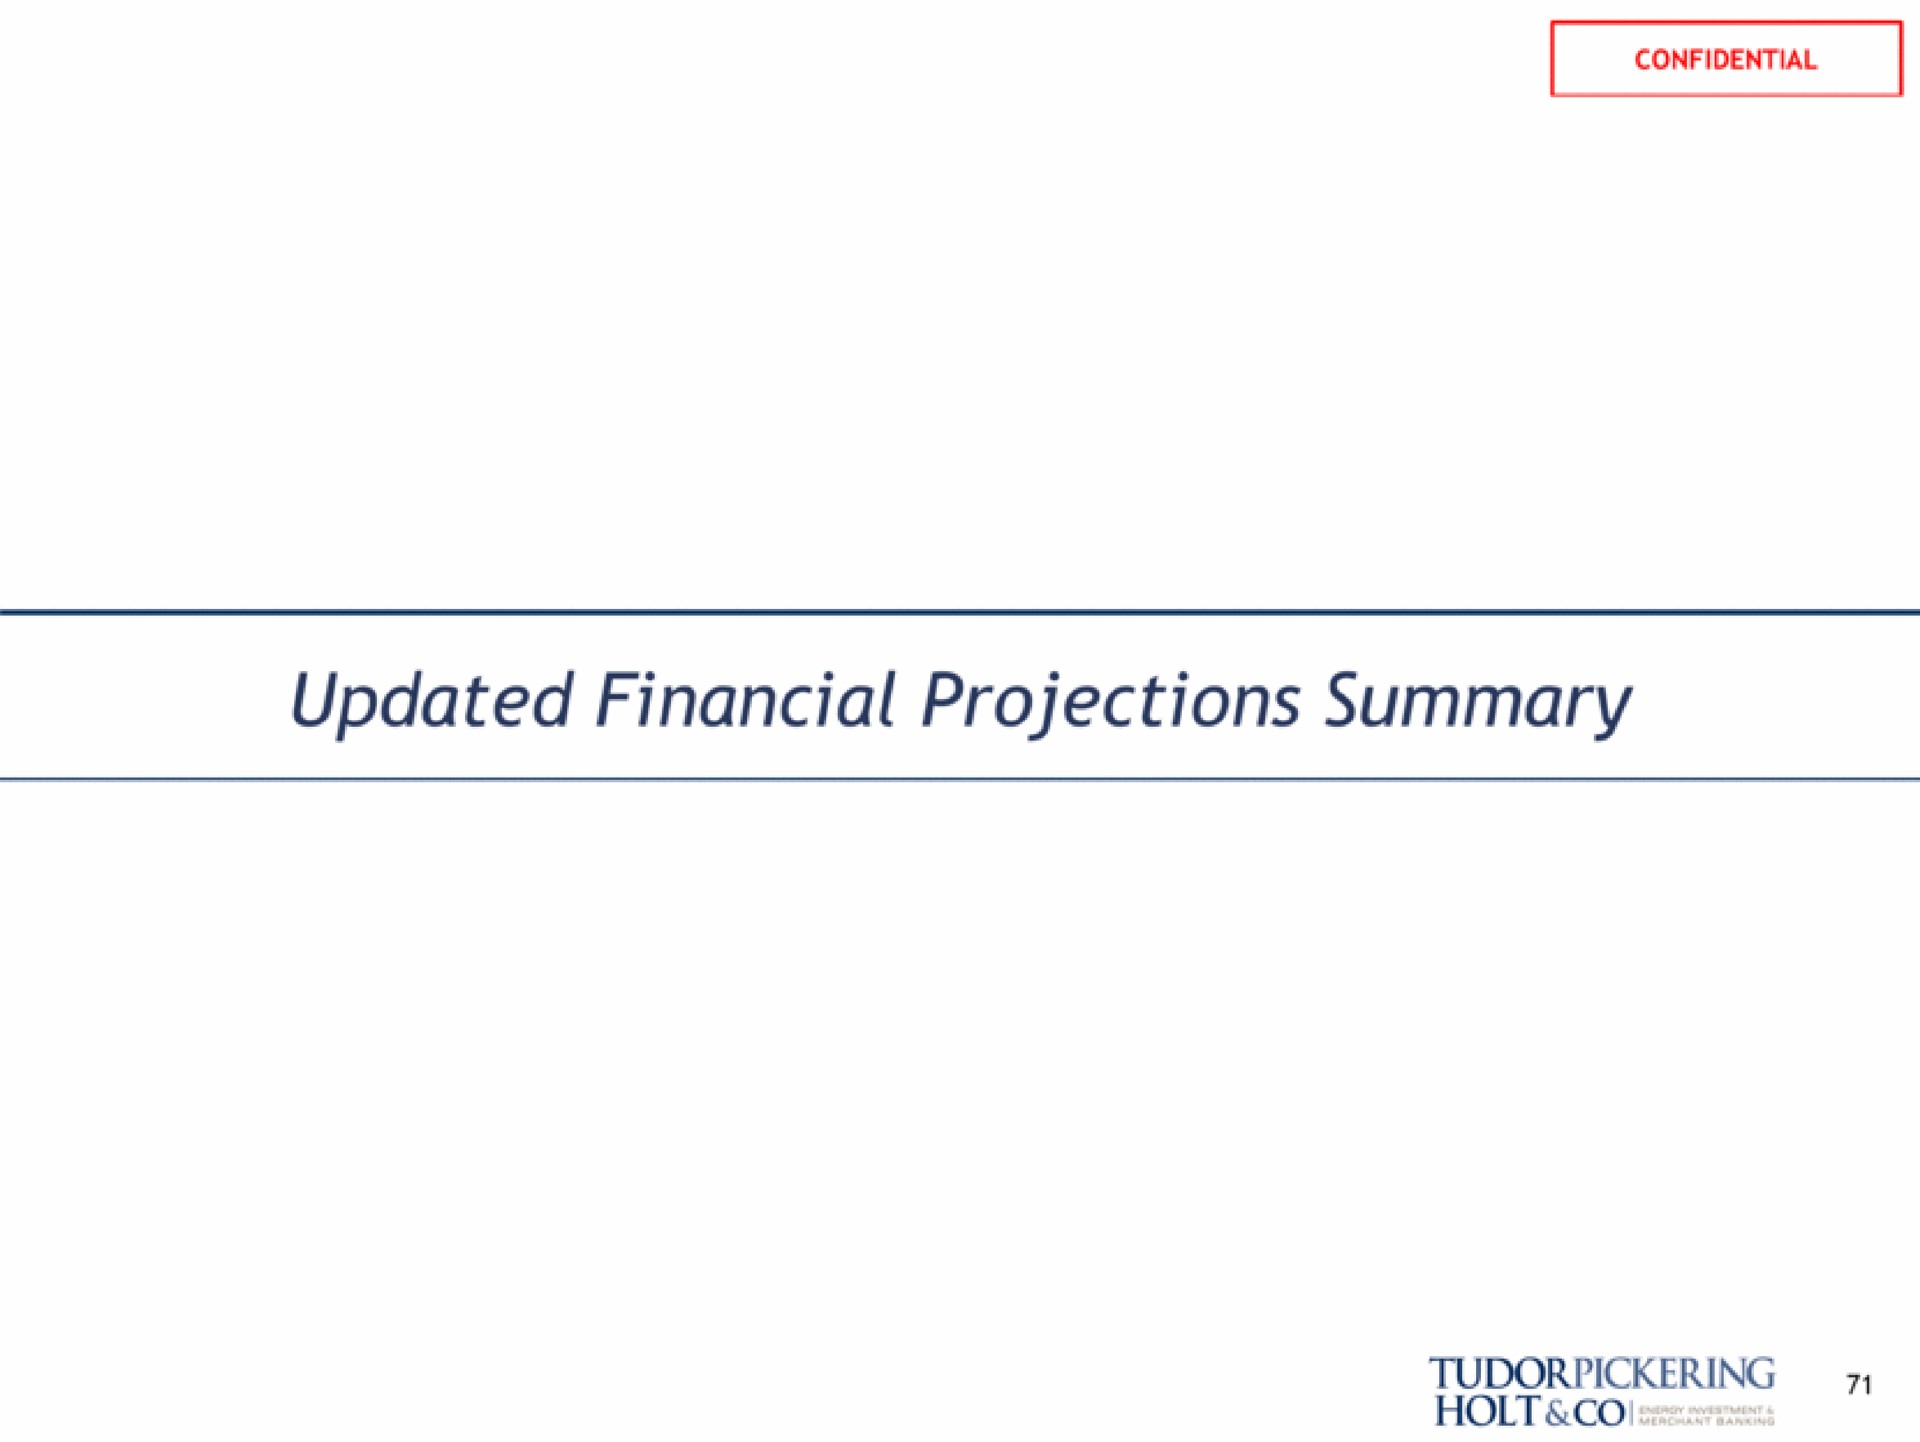 updated financial projections summary holt | Tudor, Pickering, Holt & Co